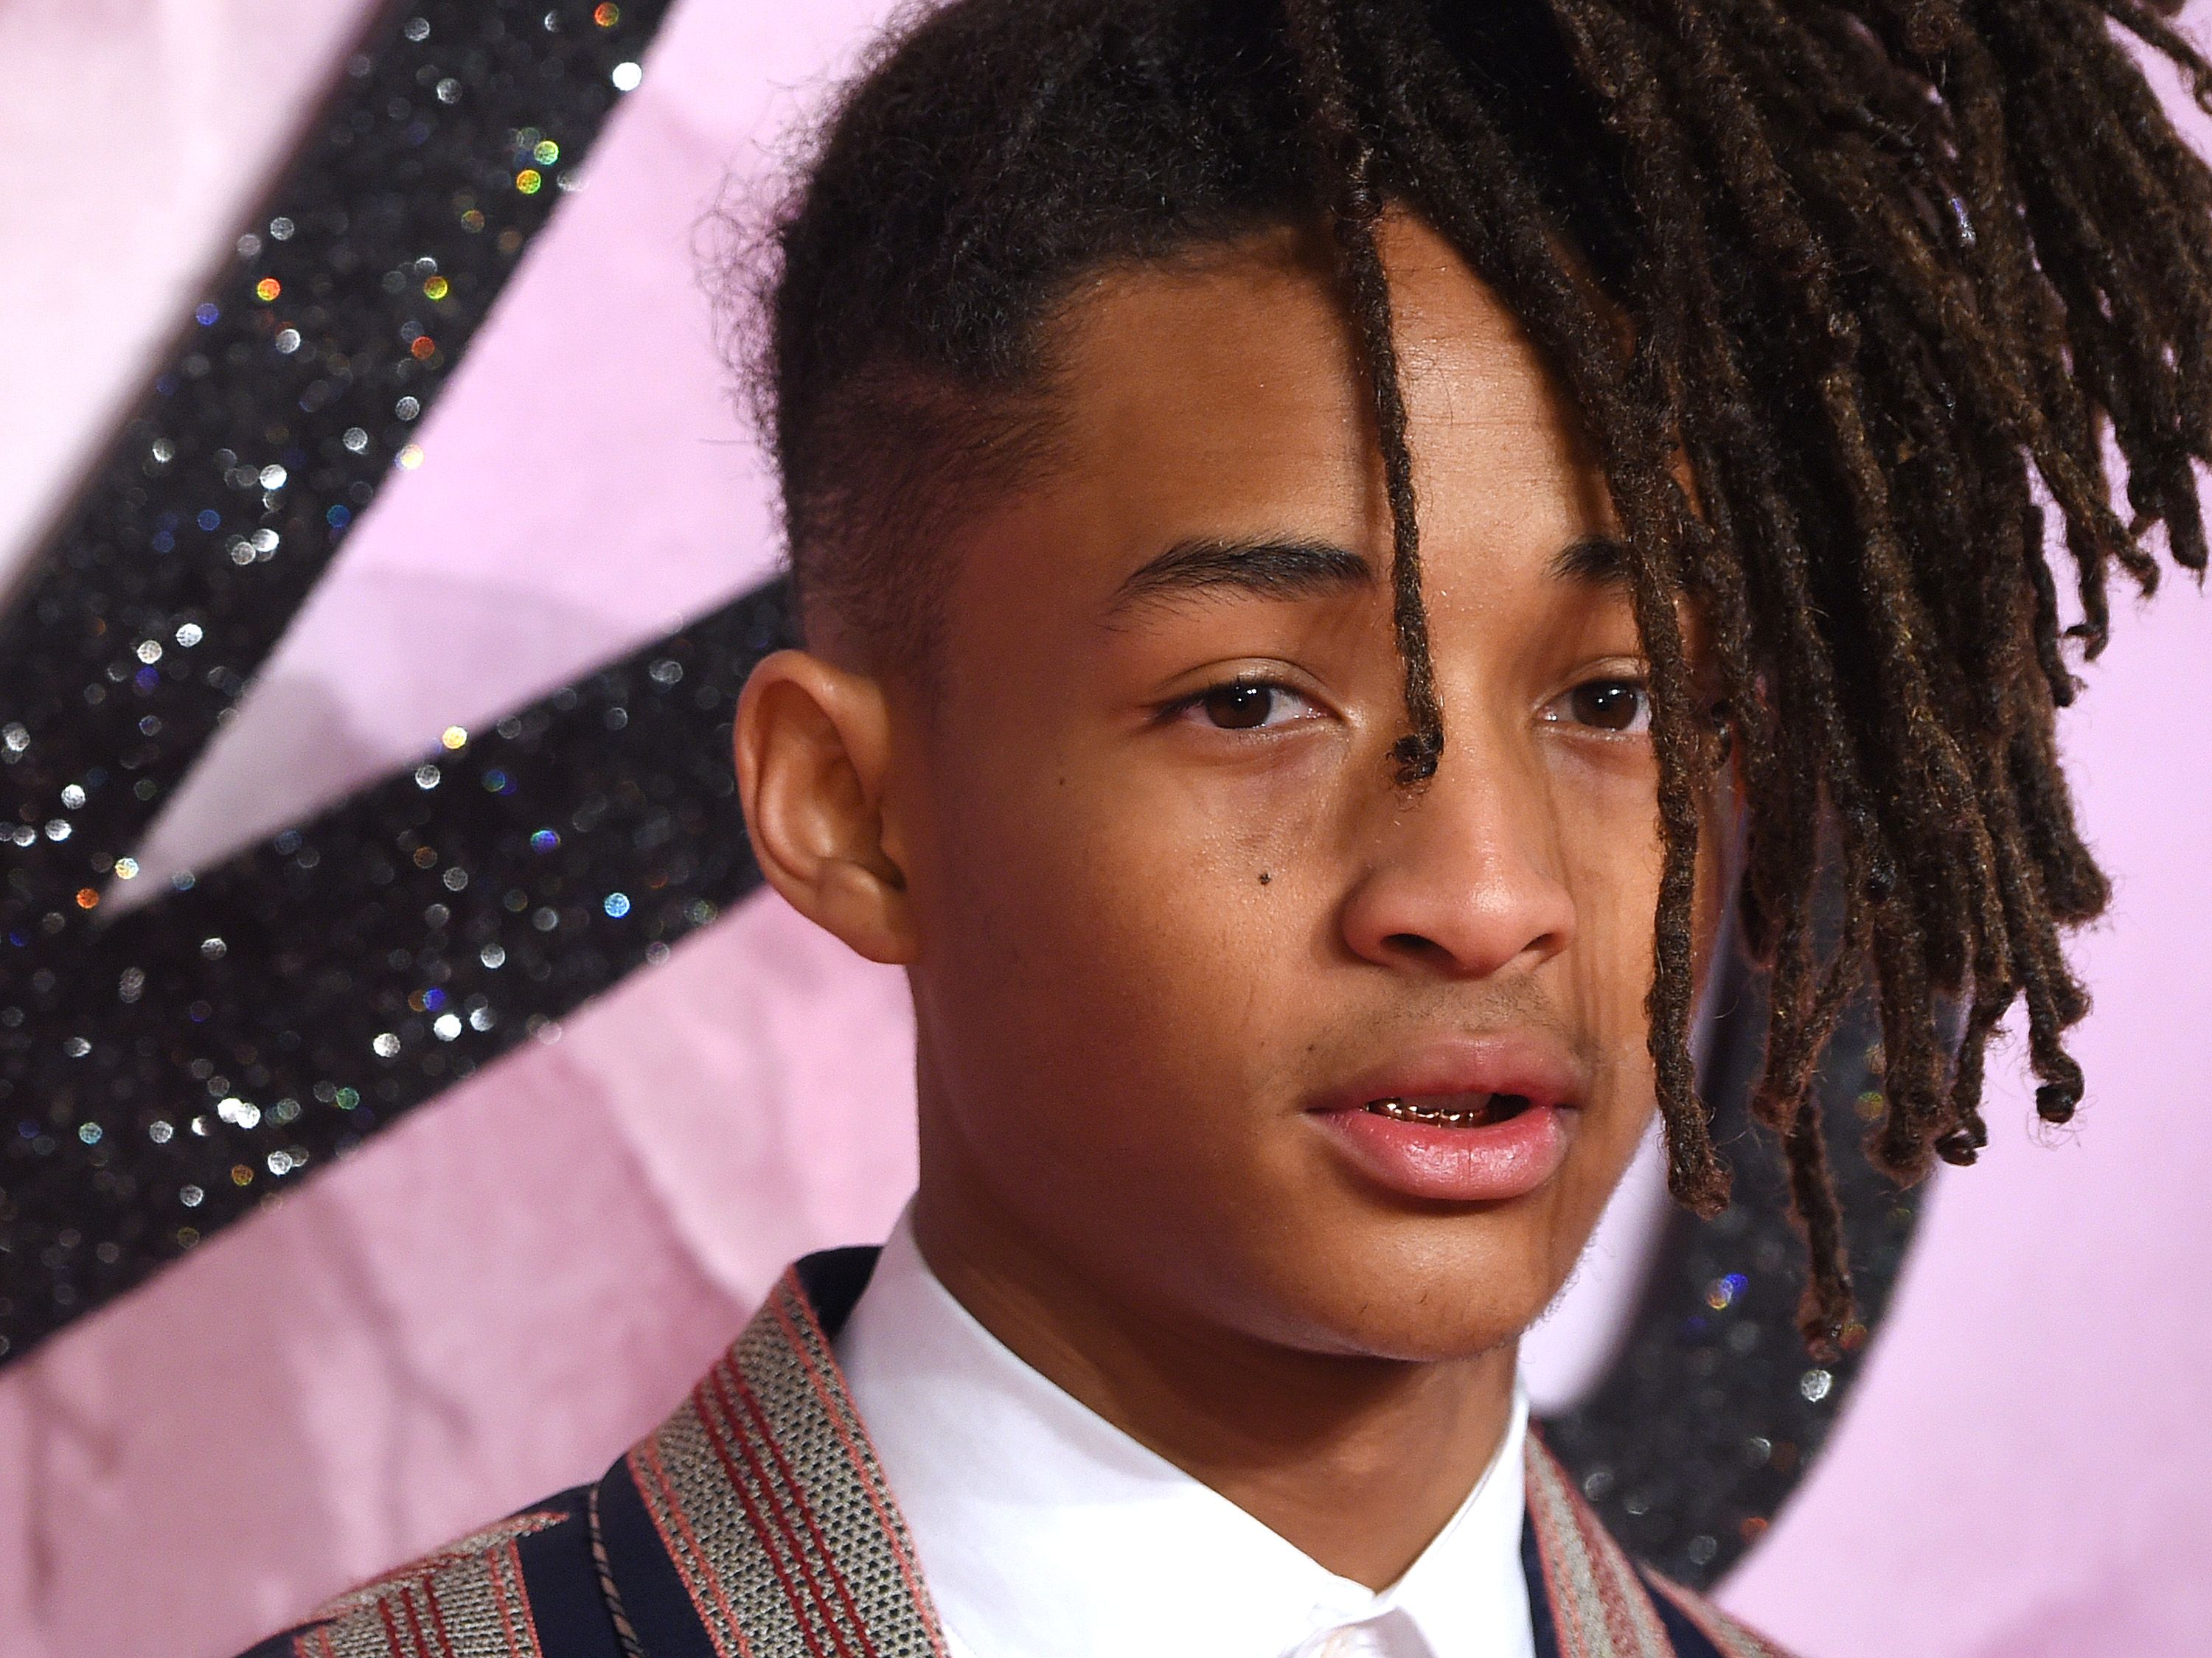 Jaden Smith shares his experience with psychedelics It started as pure  curiosity  The Independent